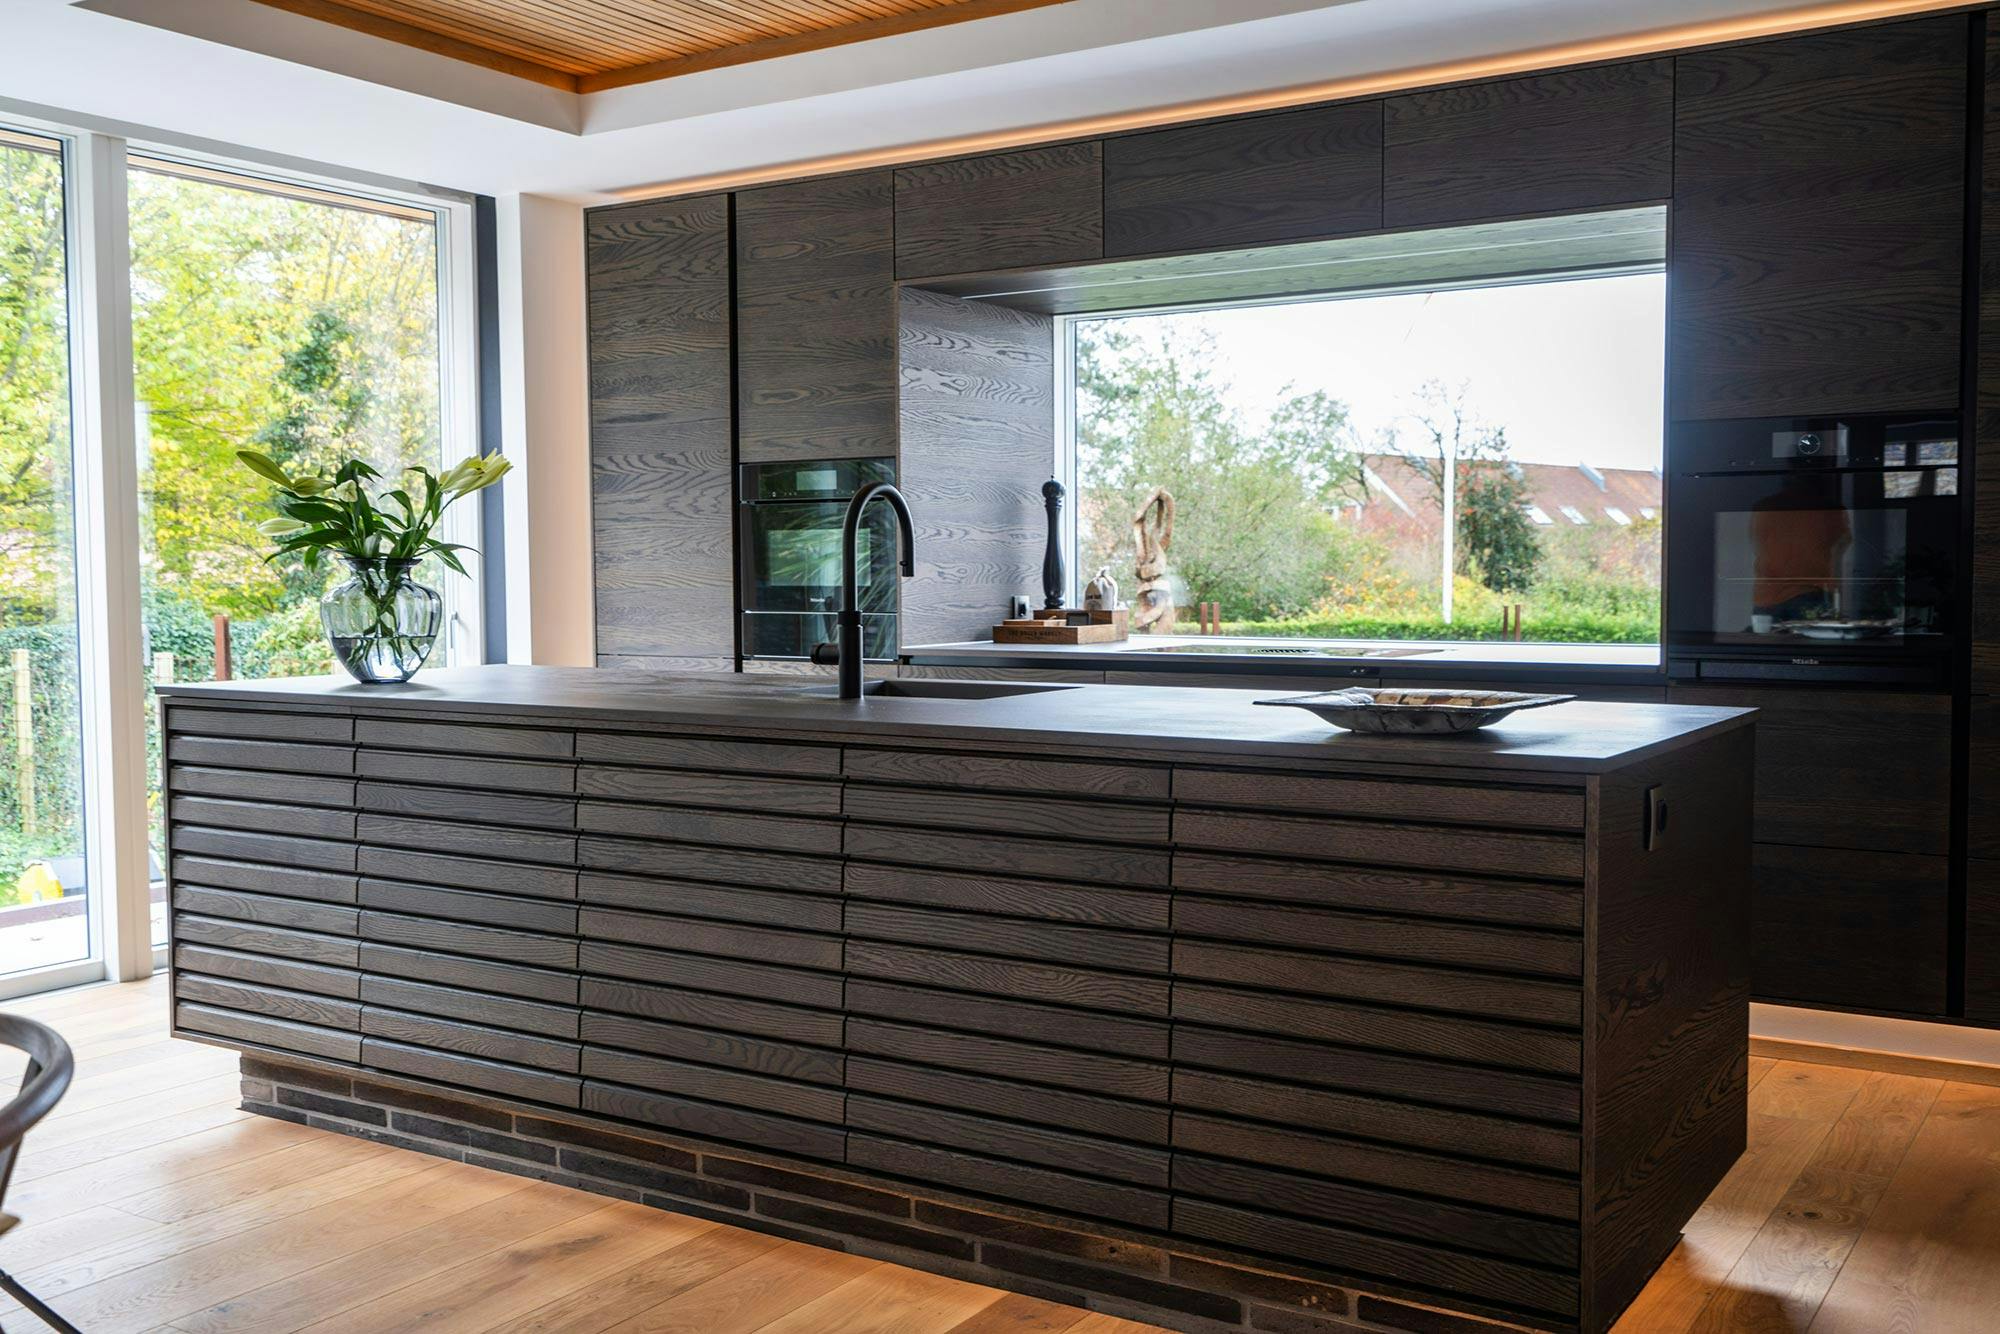 Image of Saxtoft Kitchen 1.jpg?auto=format%2Ccompress&ixlib=php 3.3 in Dekton for an integrated façade and outdoor kitchen in this private home in France - Cosentino